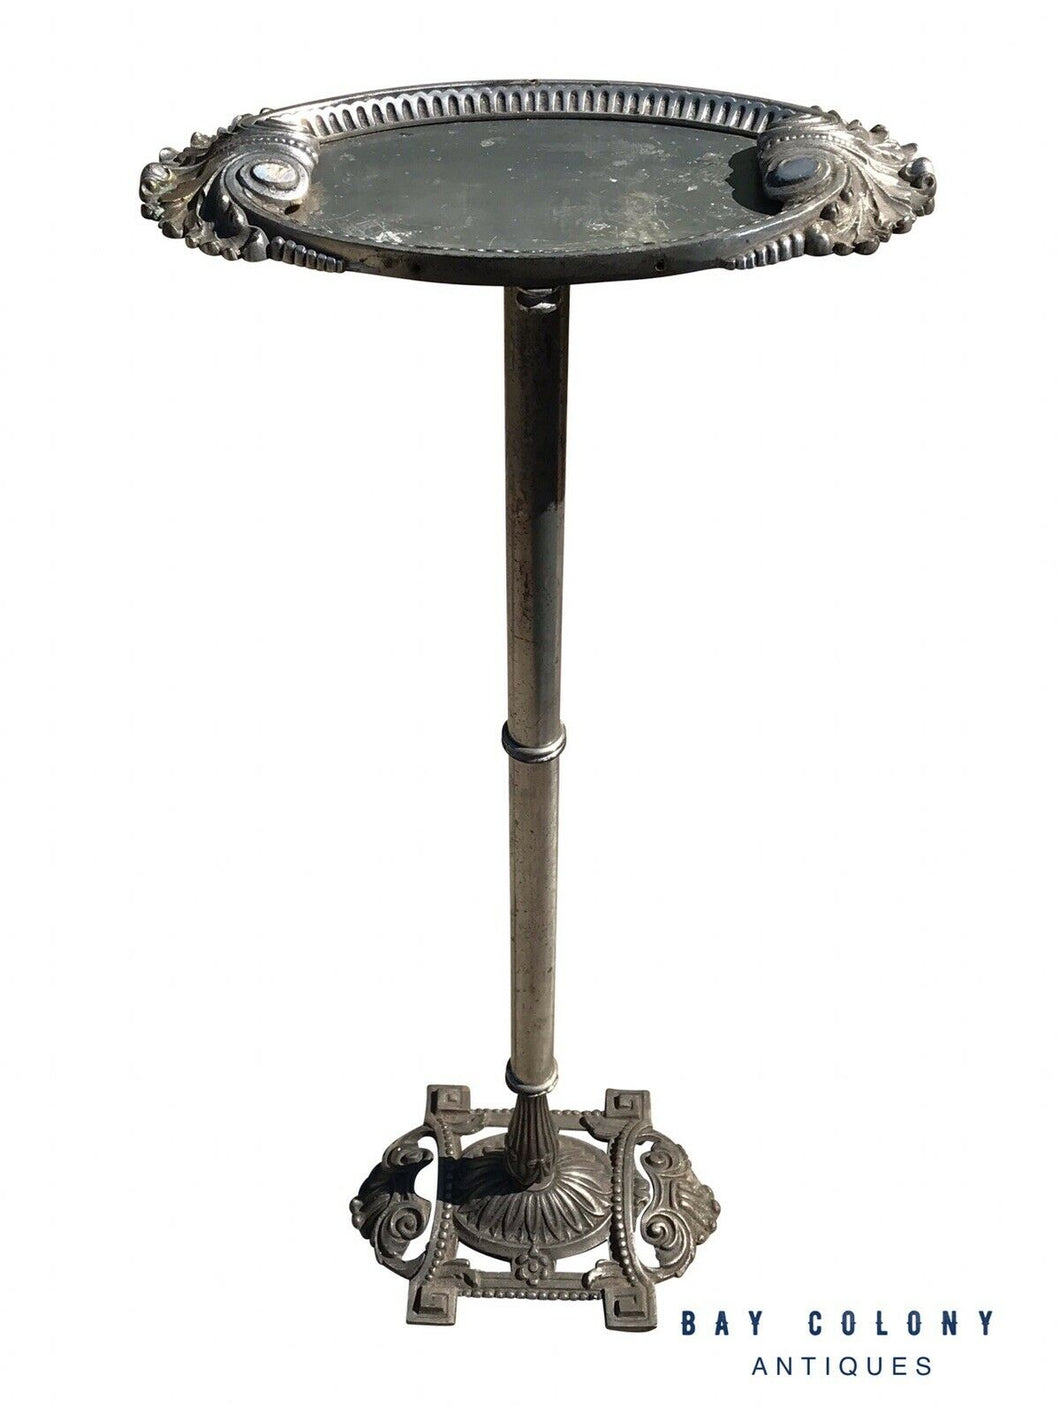 EARLY 20TH C ANTIQUE ART DECO NICKEL PLATED DRINK VALET / STAND